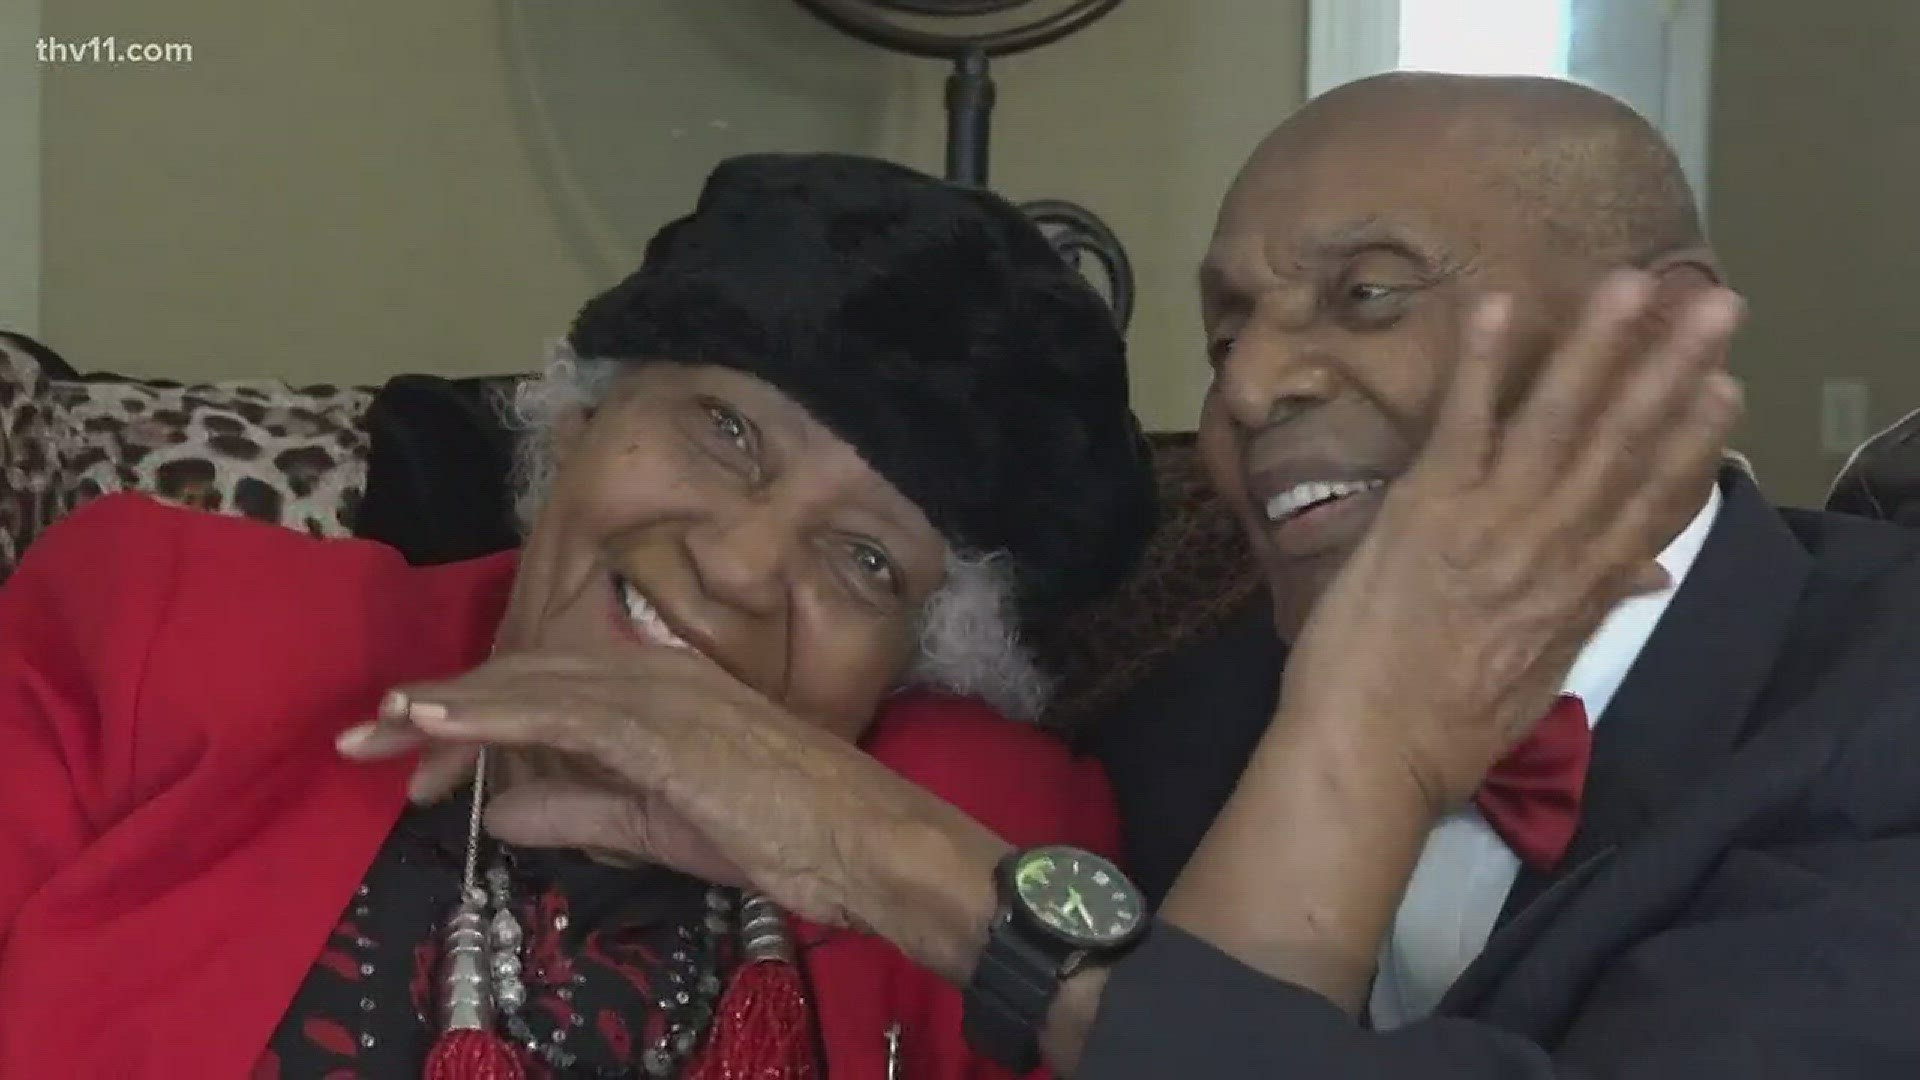 A couple is still very much in love after 78 years of marriage. What are their secrets?